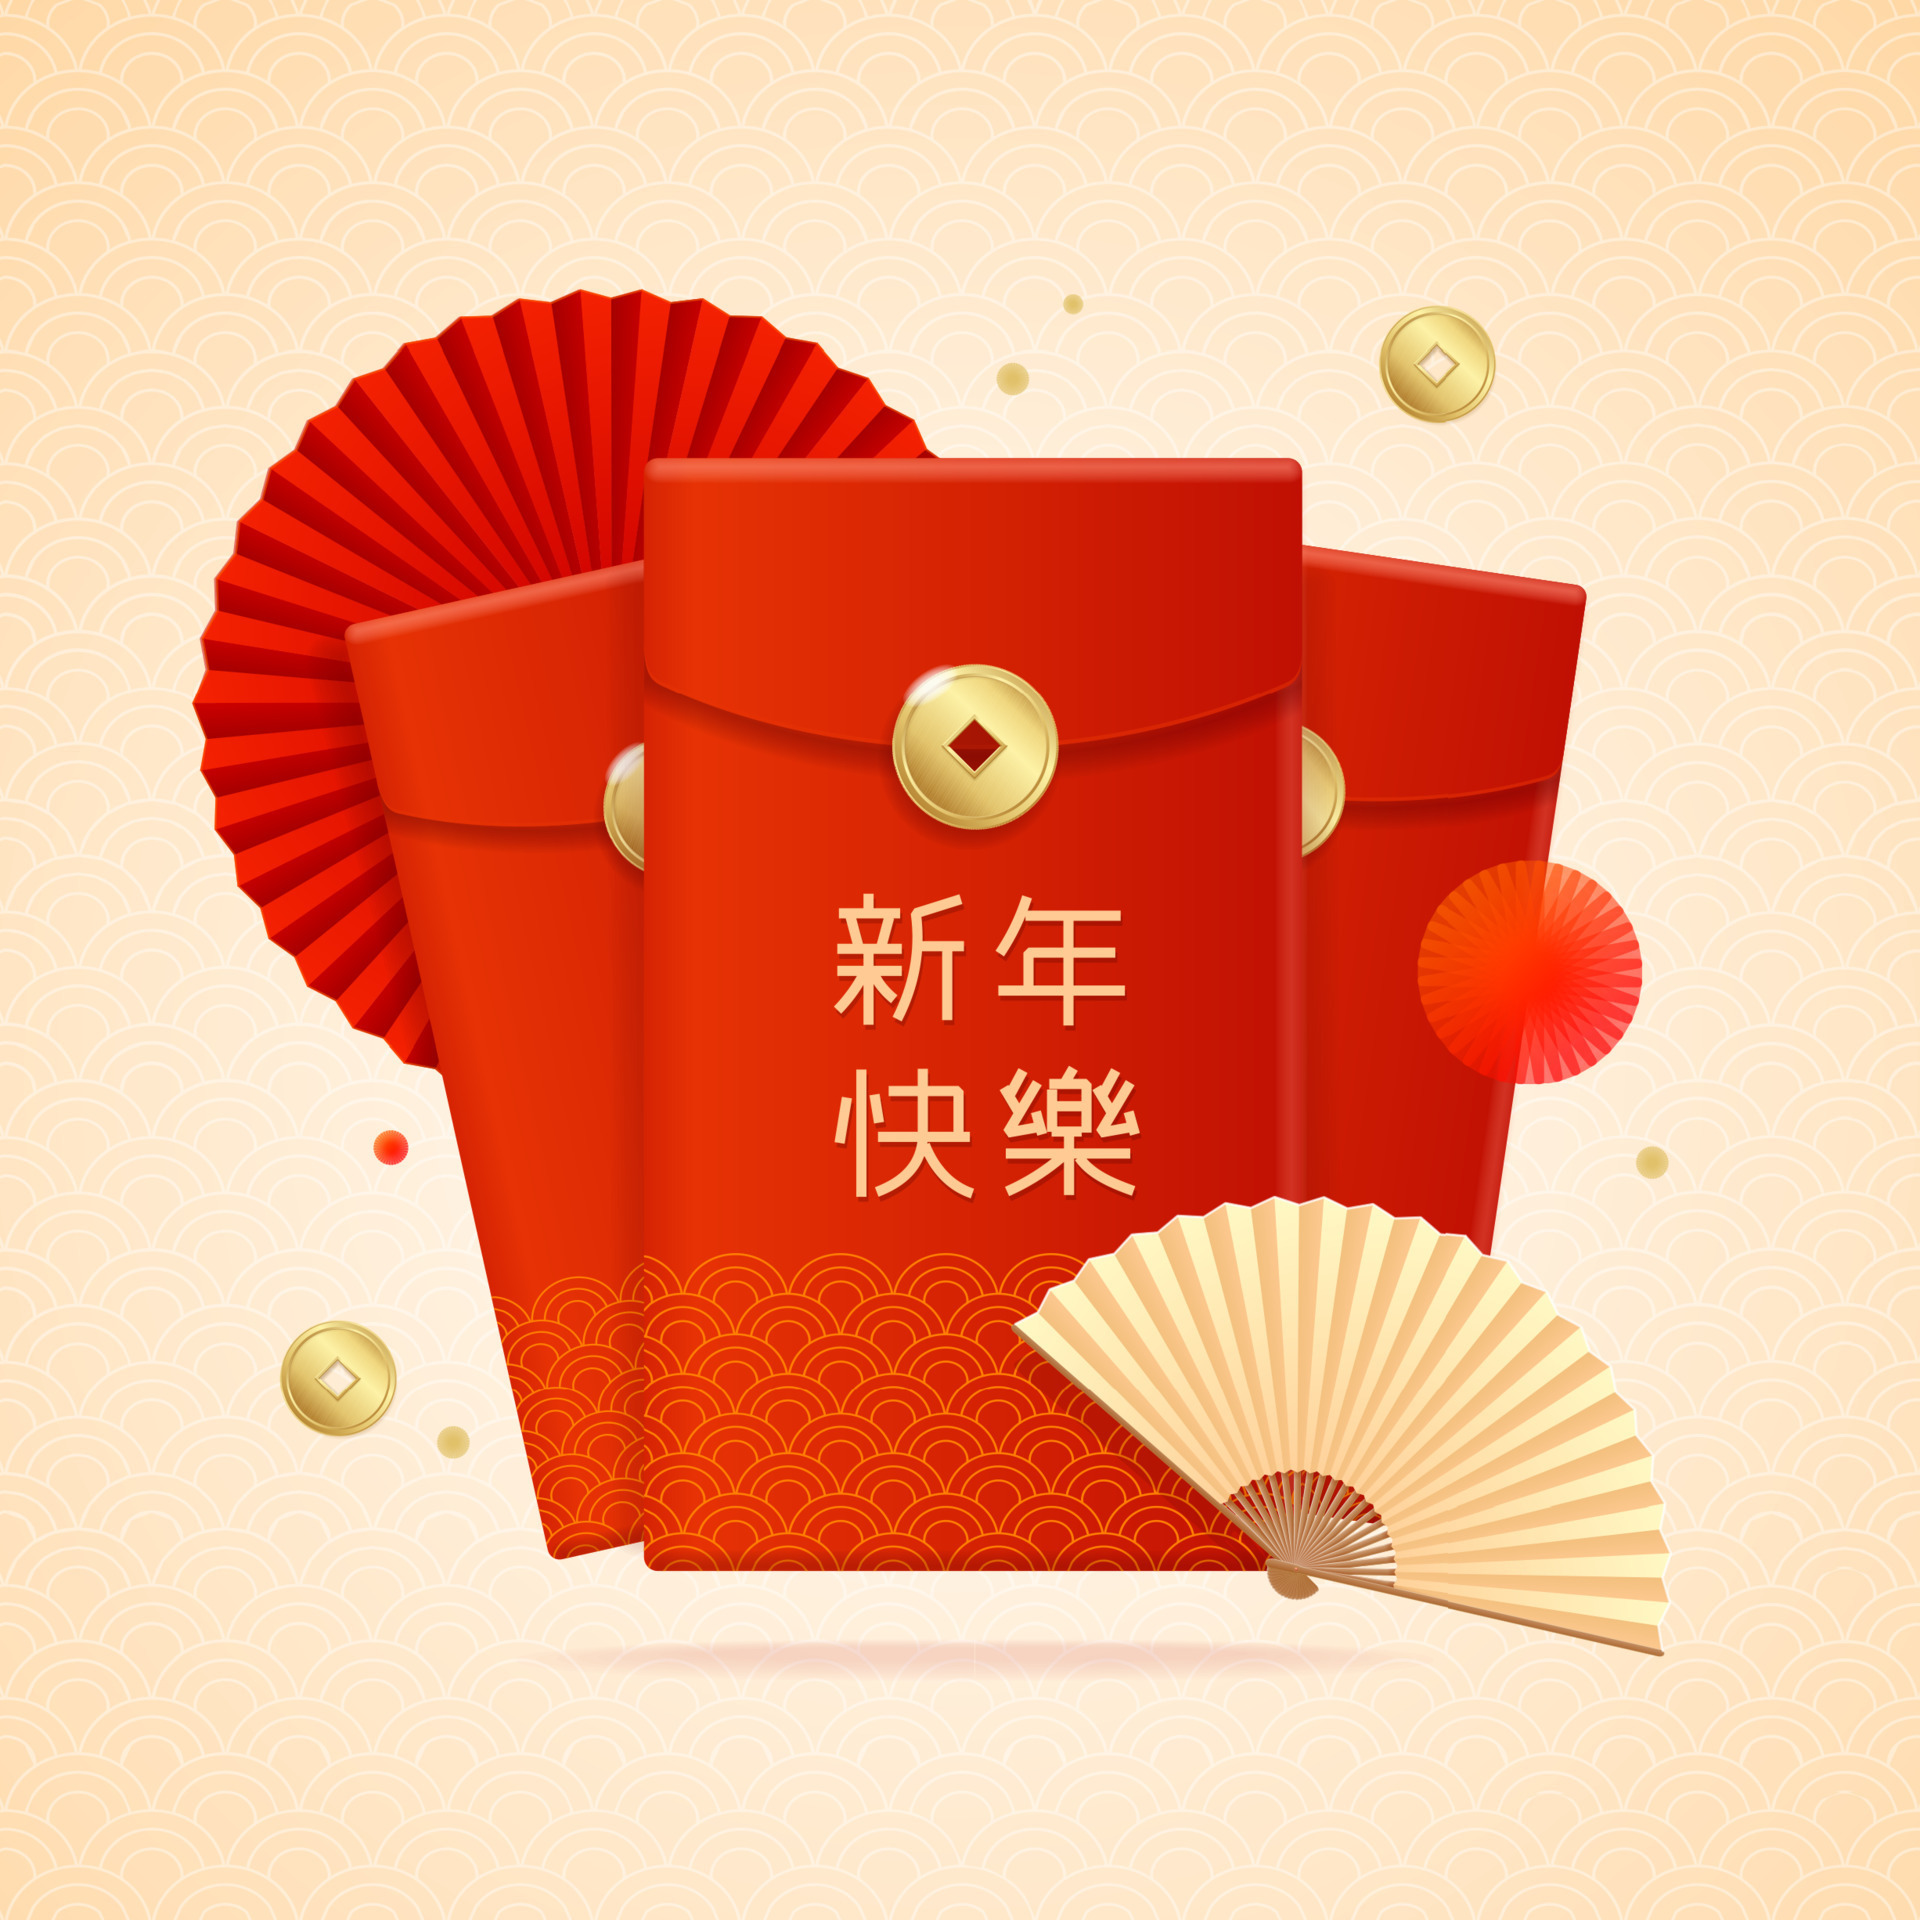 38 Stock Illustration Red China_envelope Images, Stock Photos, 3D objects,  & Vectors